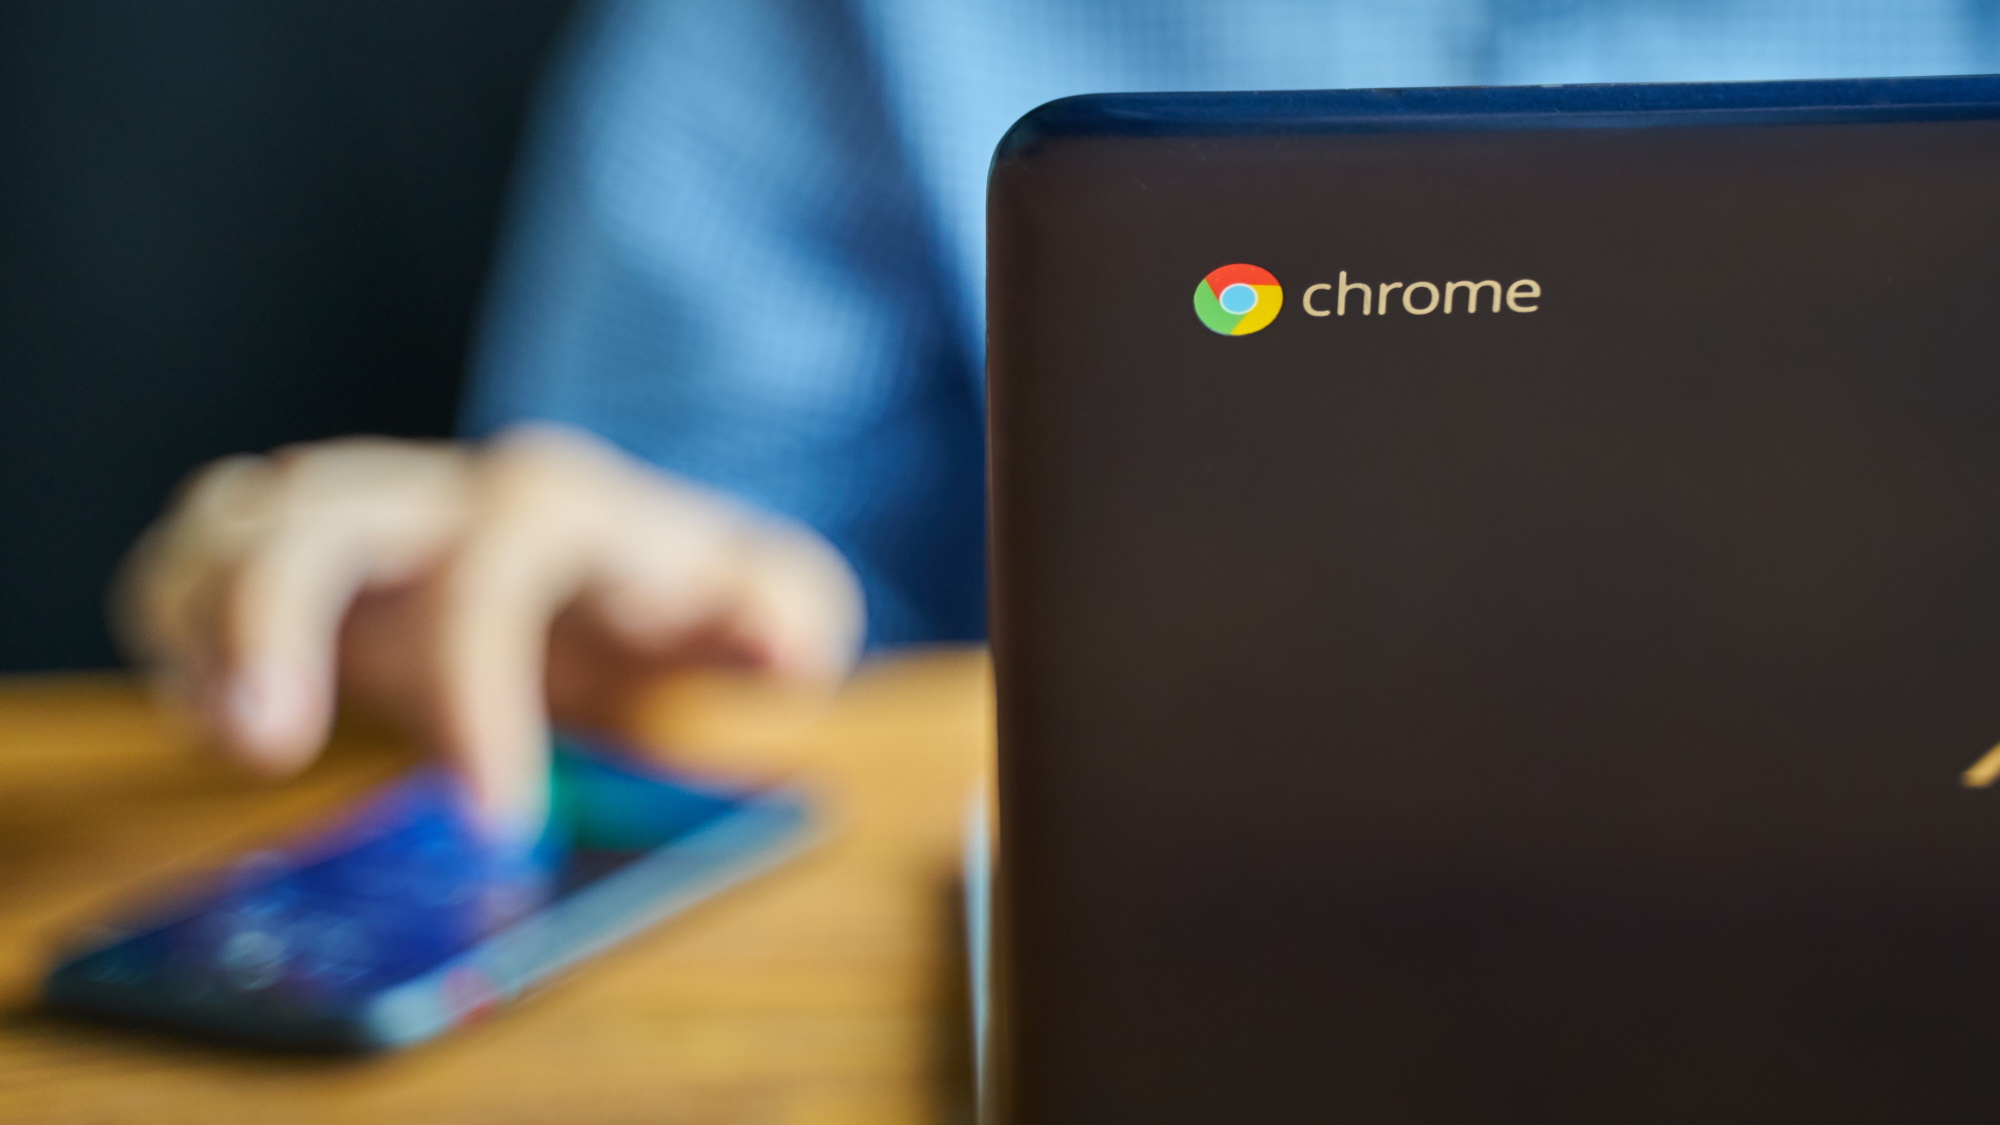 Chrome logo on the back of a Chromebook with a man out of focus working on it